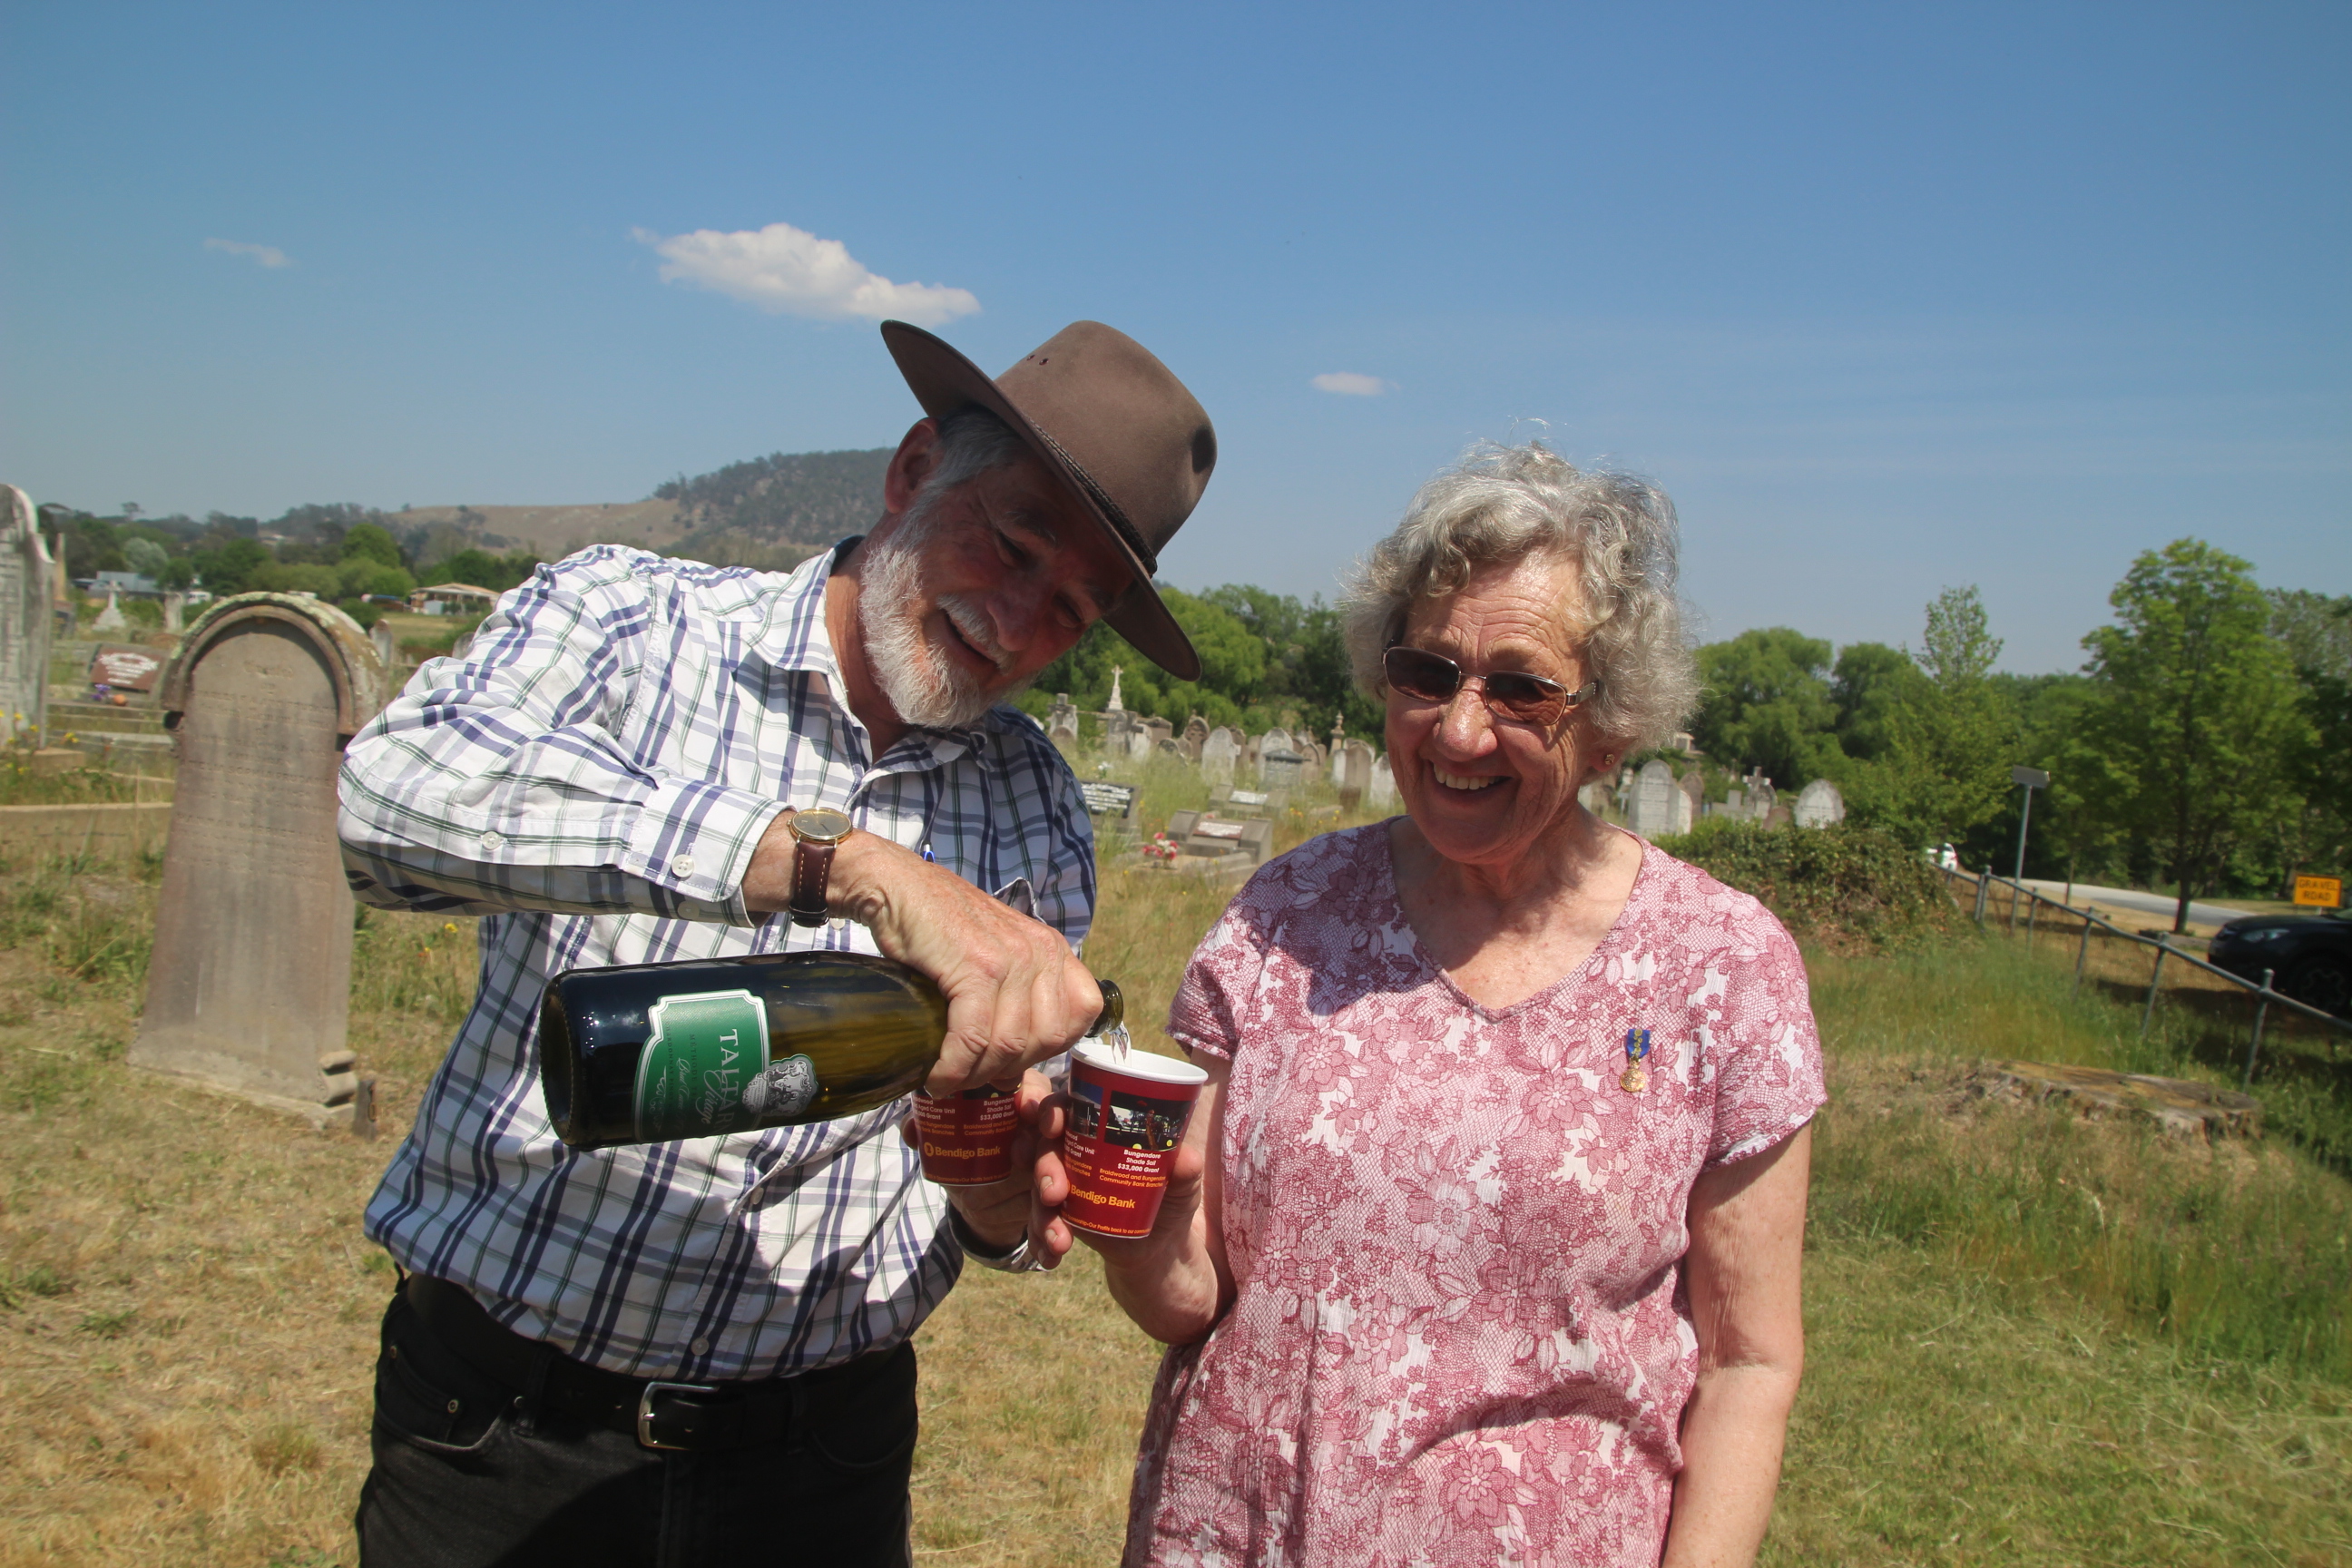 Grave remembrance in Braidwood - mapping the resting place of ancestors